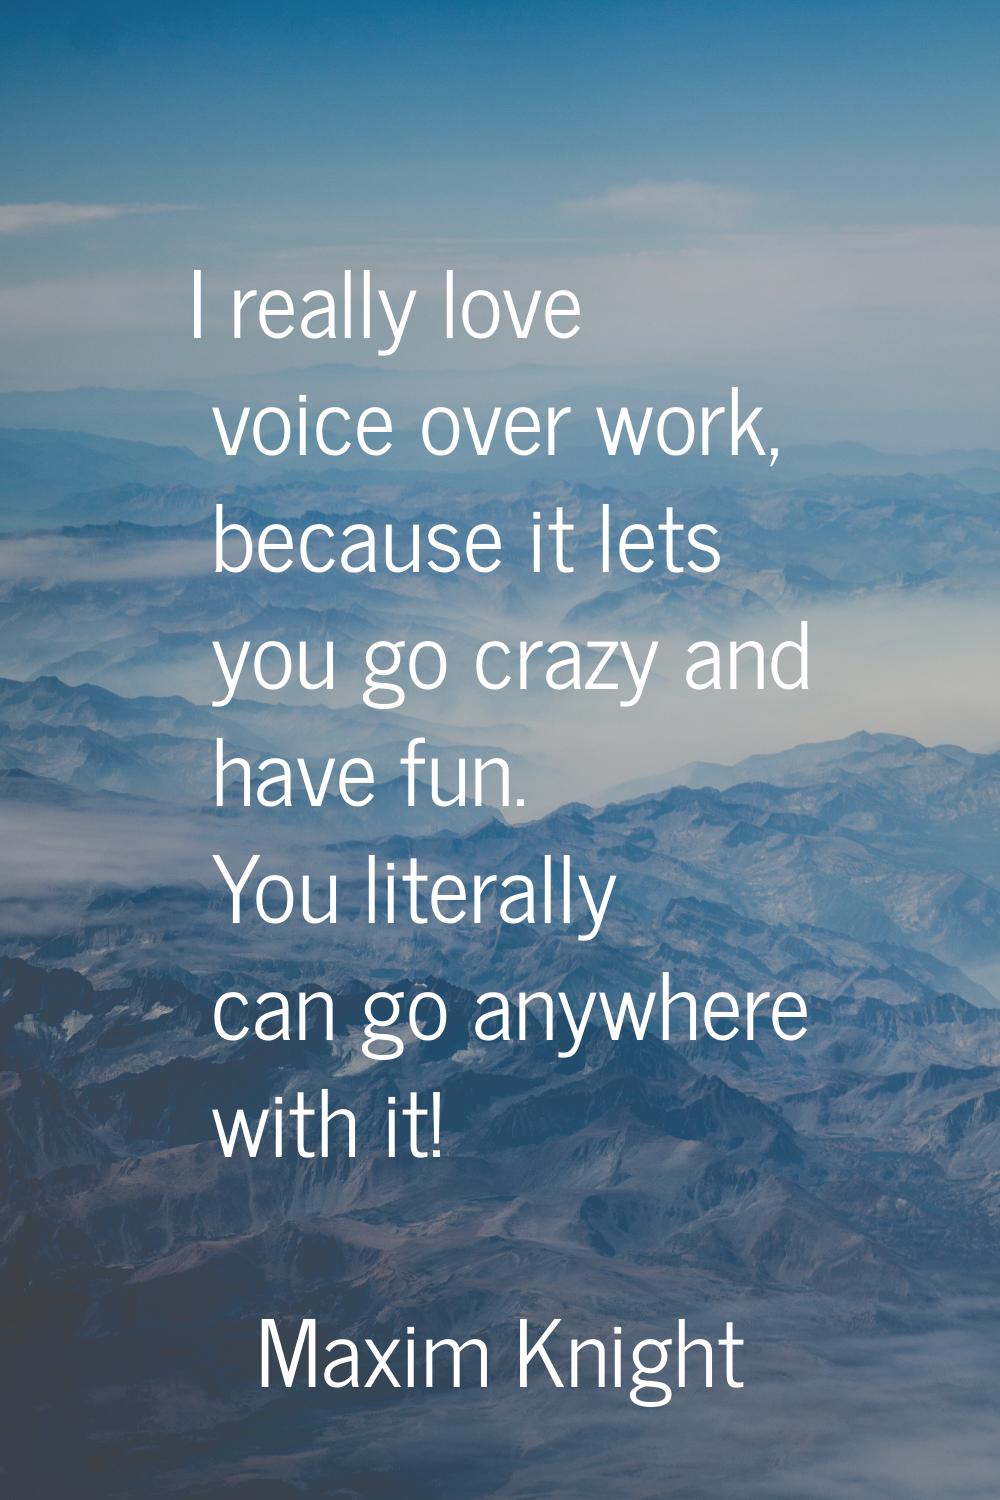 I really love voice over work, because it lets you go crazy and have fun. You literally can go anyw